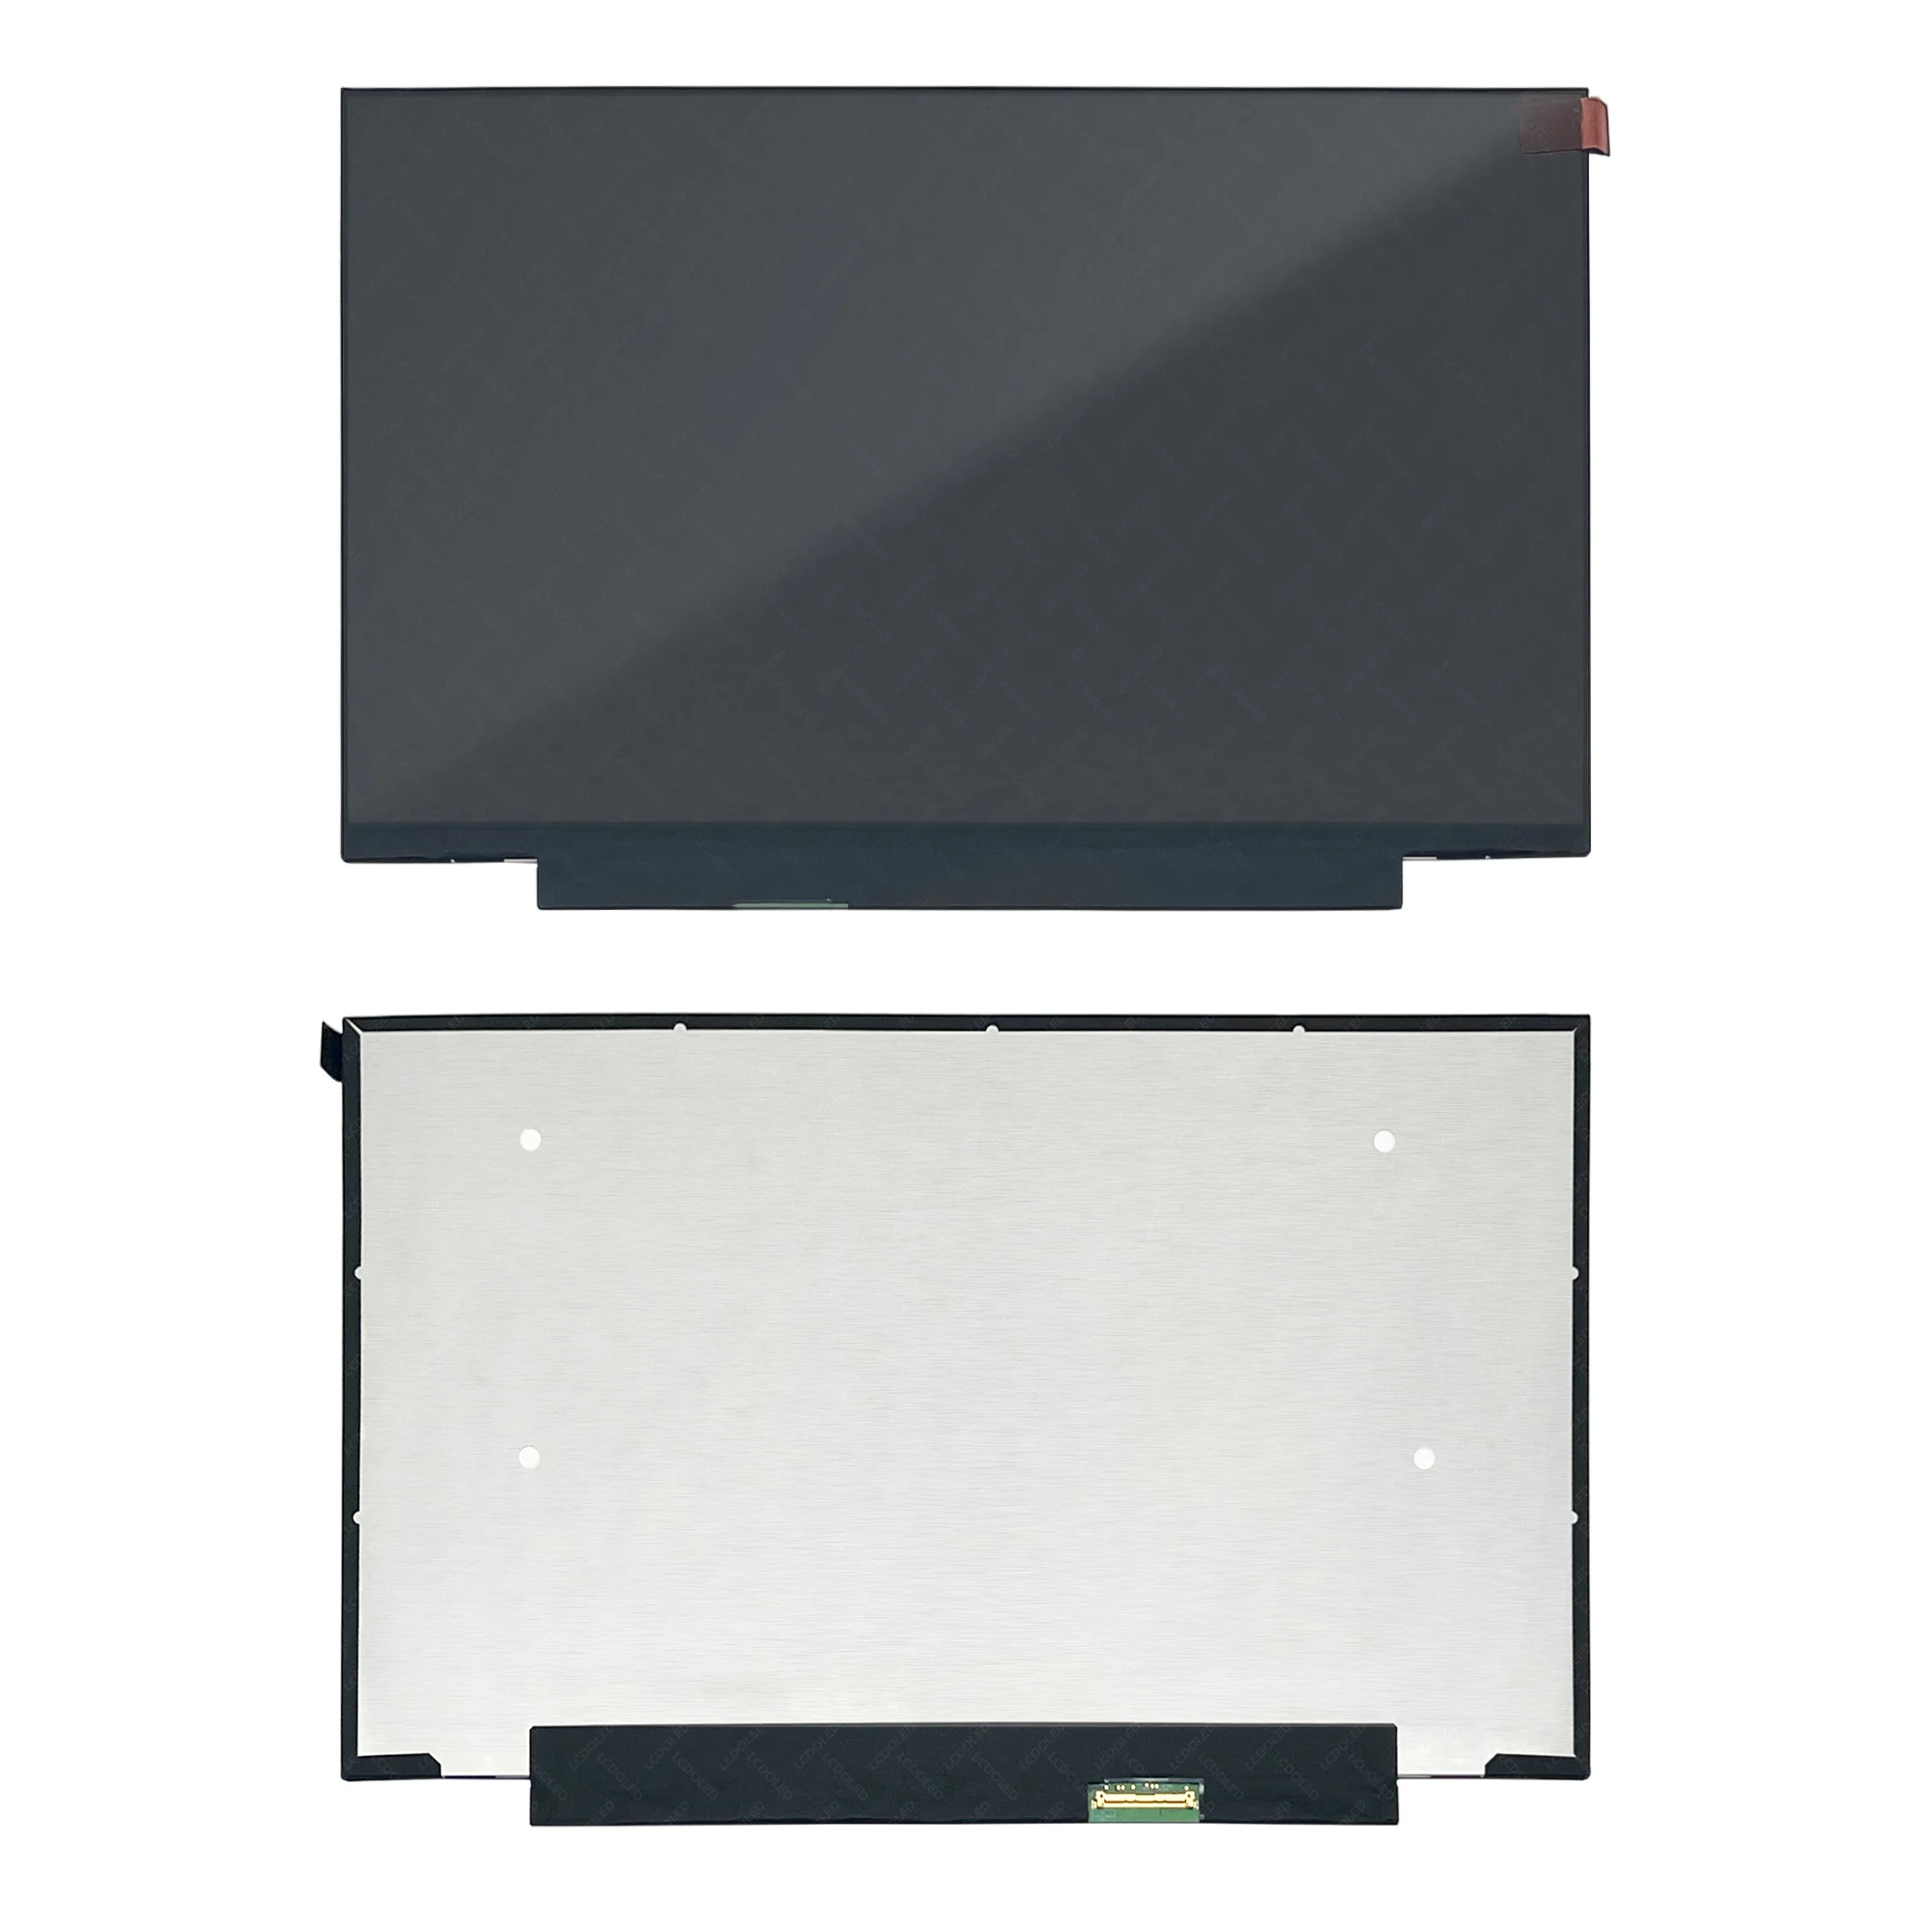 144 Hz 14.0'' FHD IPS LCD Screen Display Panel Matrix Non-Touch LM140LF1F02 NCP005E 1920X1080 40 Pins